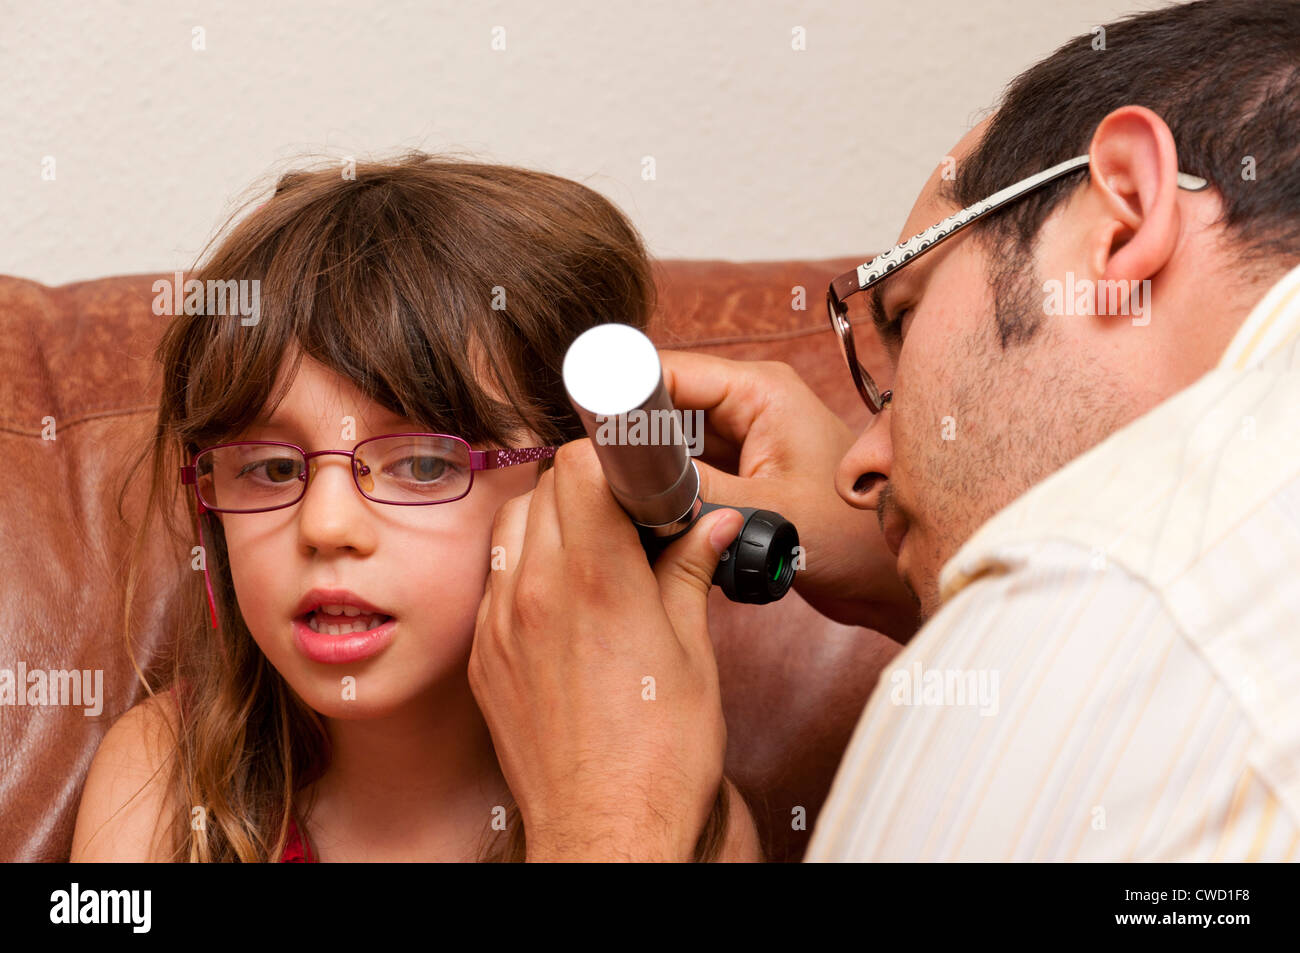 Doctor on a home visit examining a child with a otoscope. Stock Photo